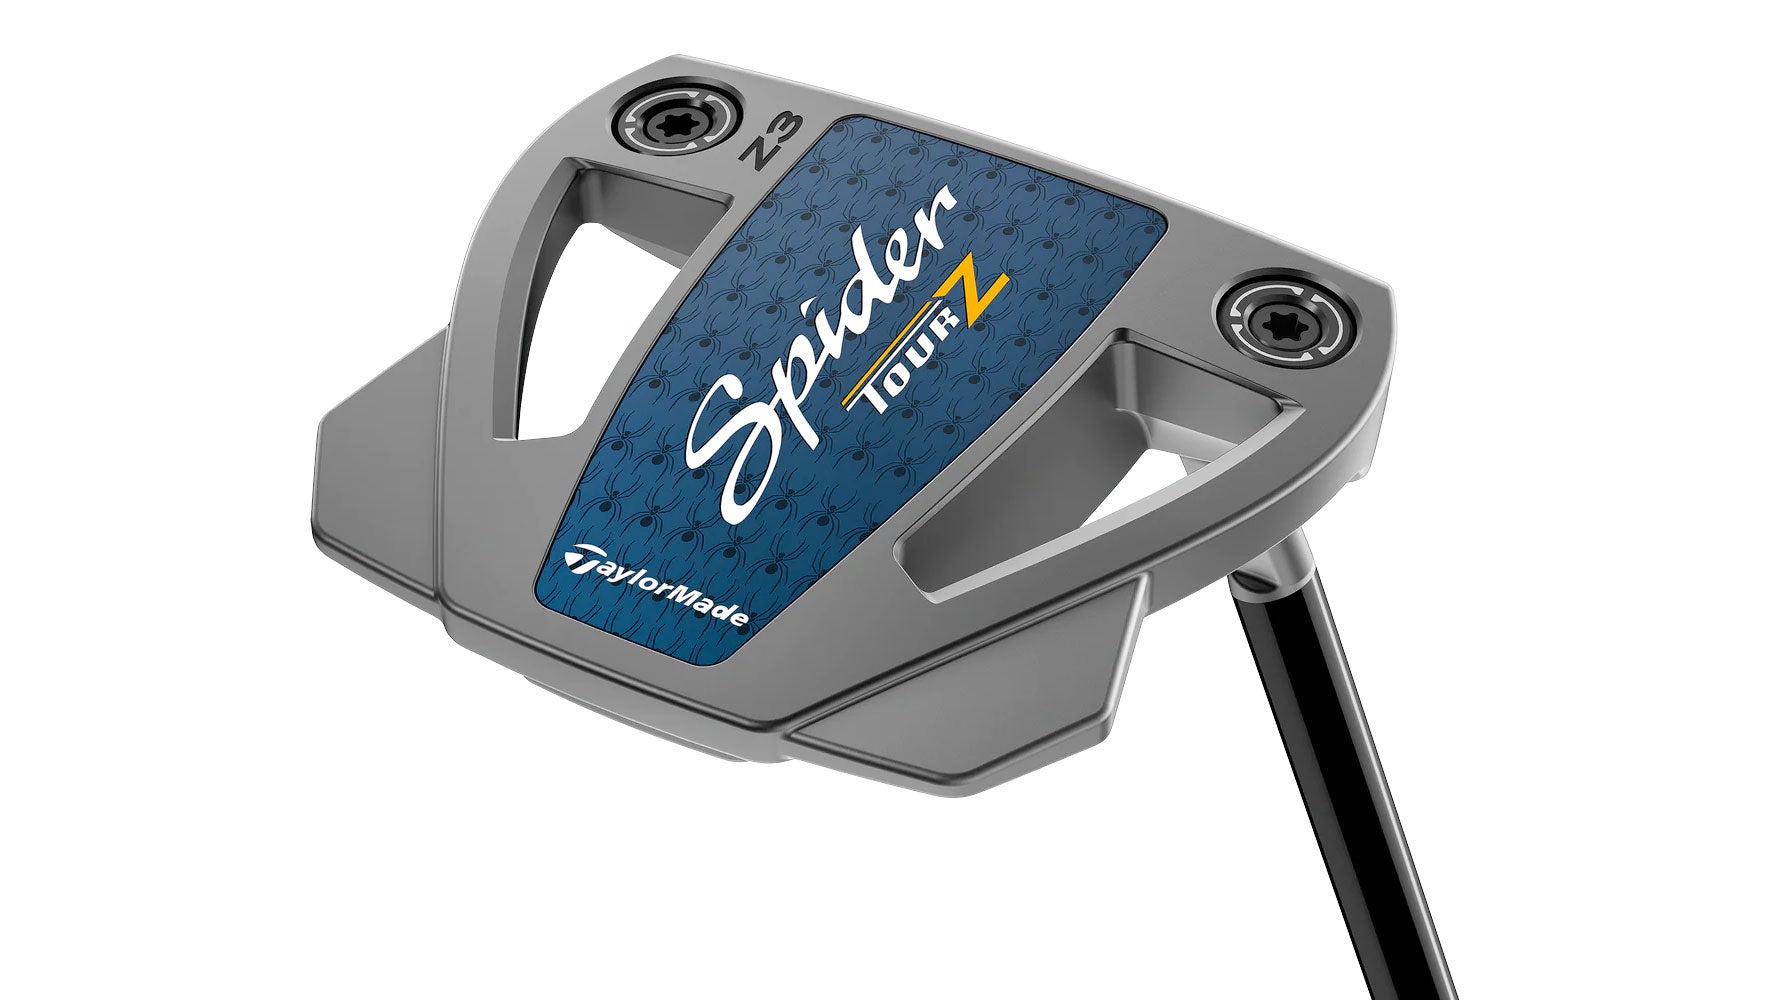 TaylorMade Spider Tour putters: Full reviews